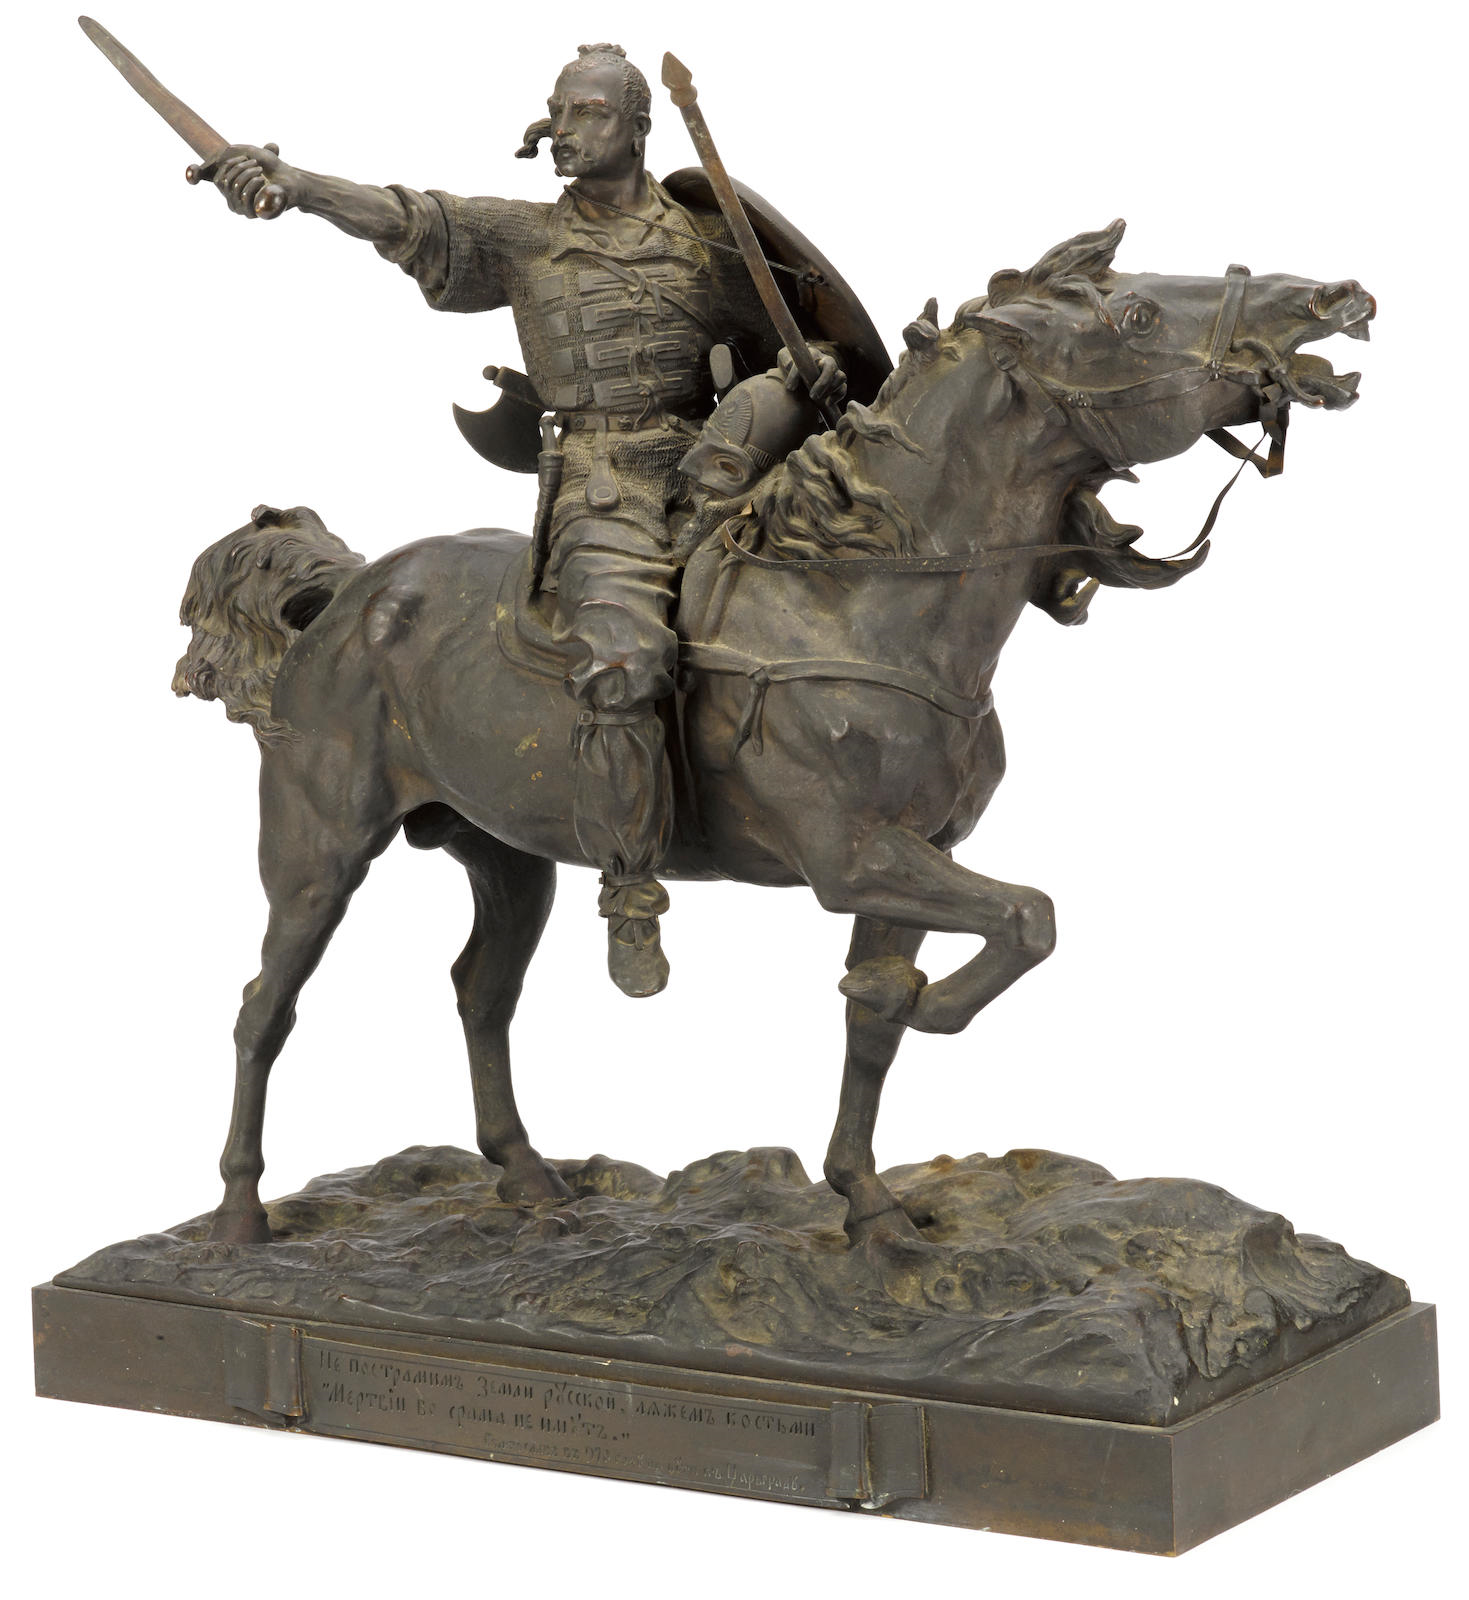 Antique Art and Weaponry Sale, May 30, 2020 Sofe Design